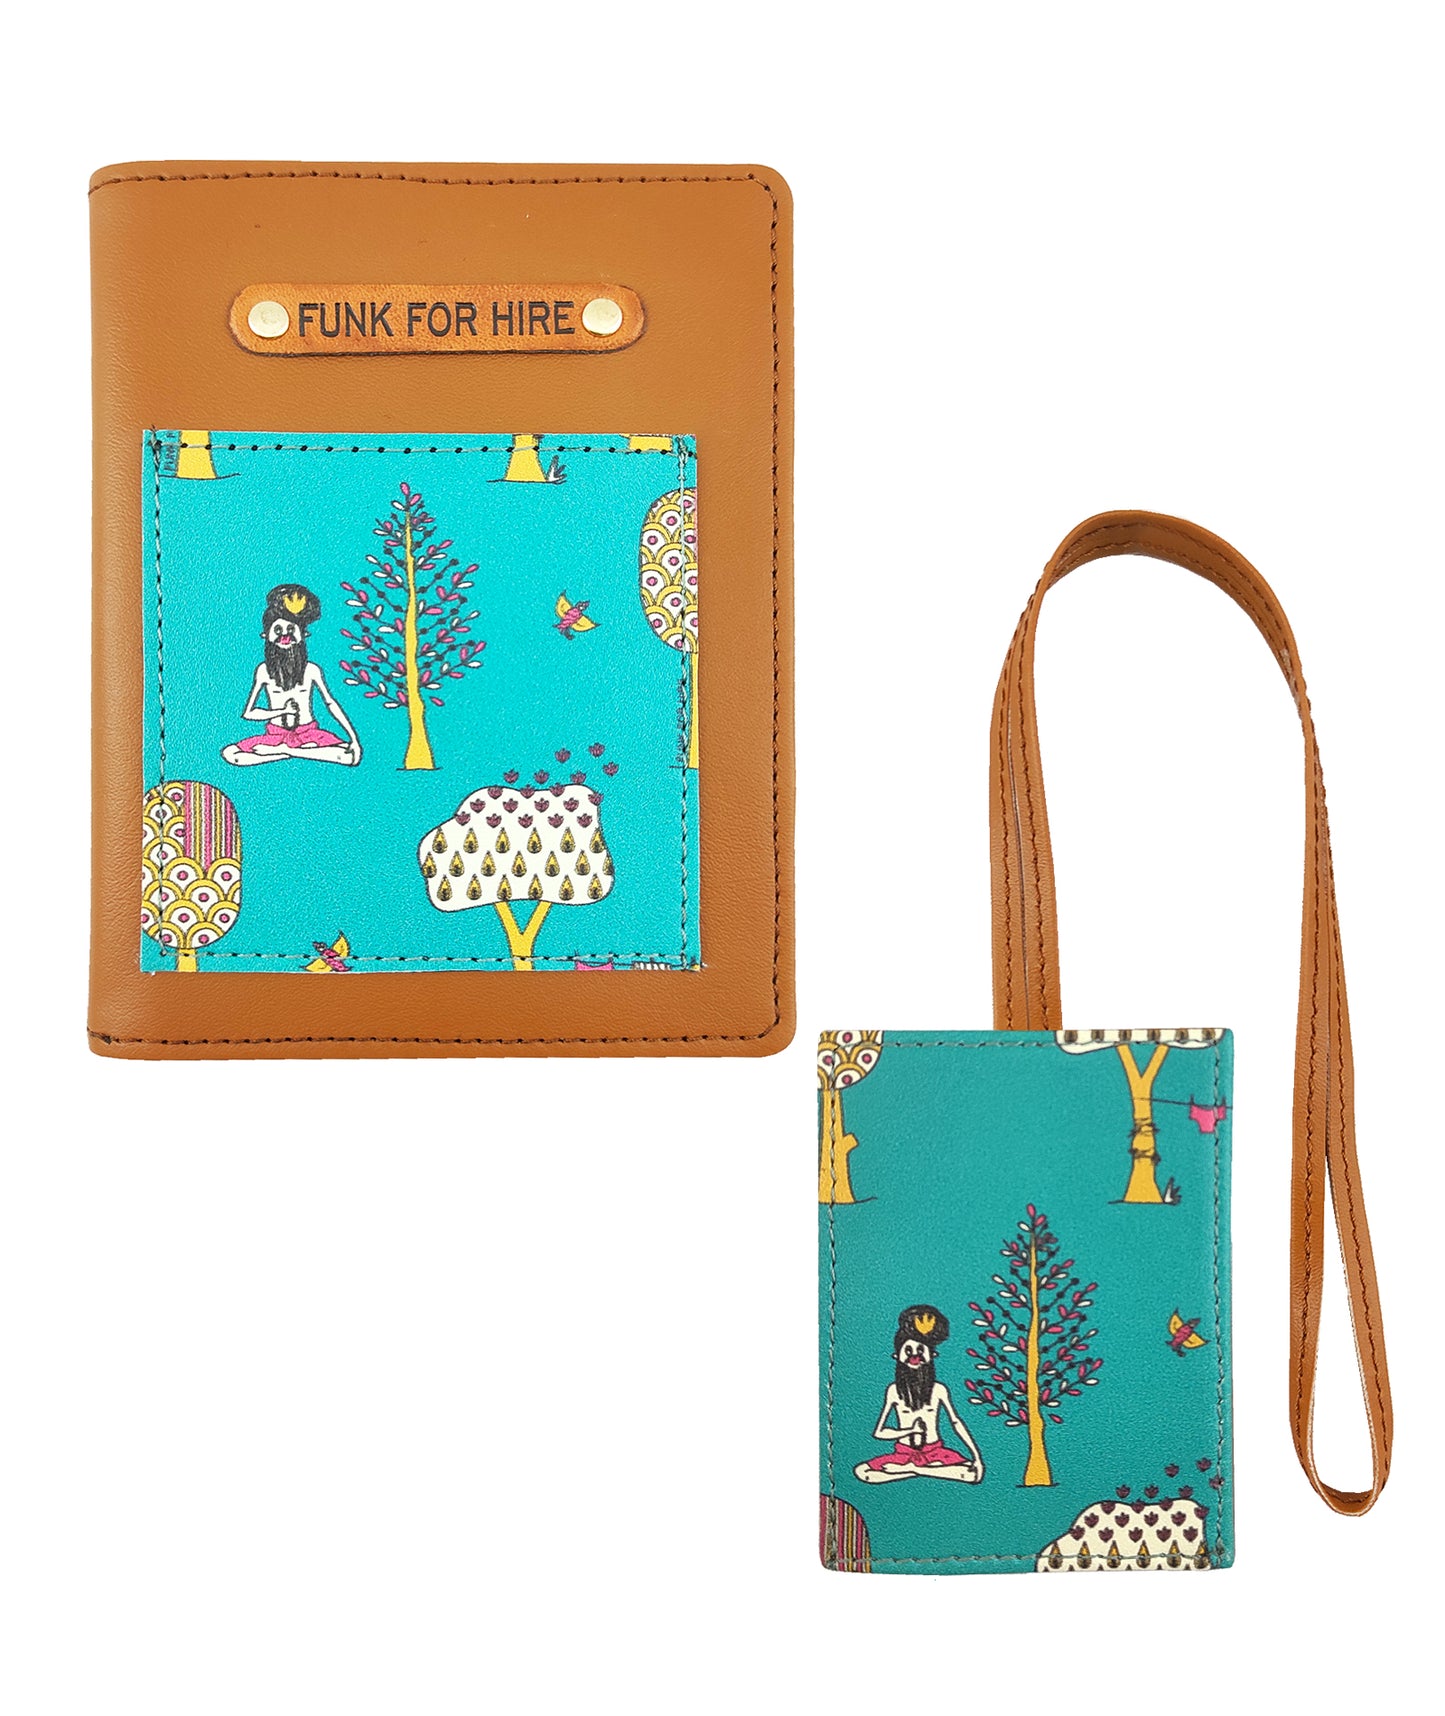 Tree printed Leatherette Passport Case with Luggage Tag